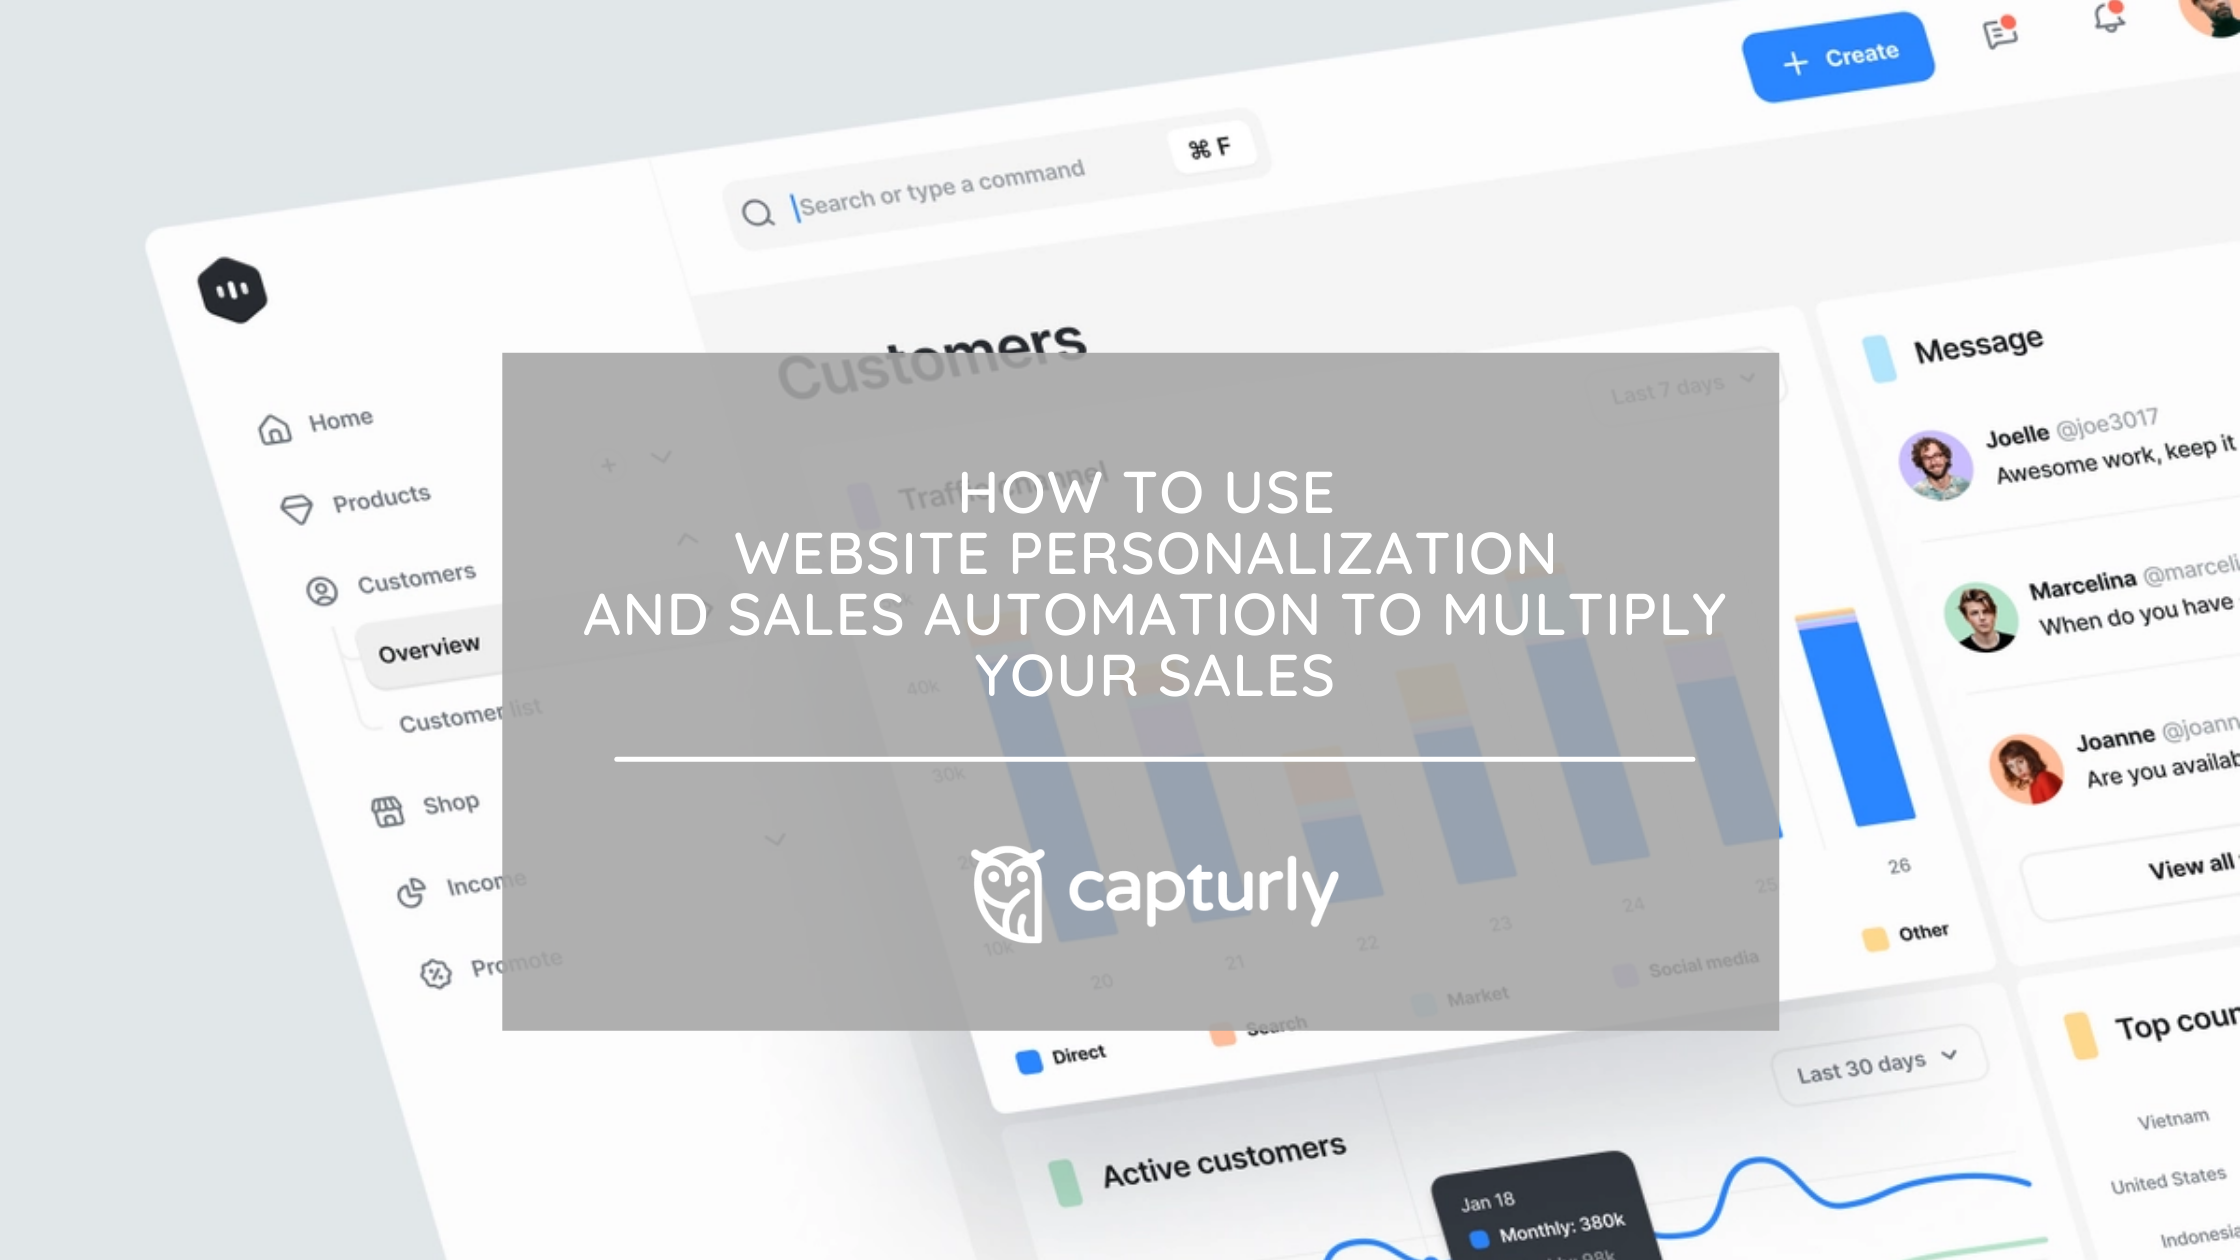 How to Use Website Personalization and Sales Automation to Multiply your Sales